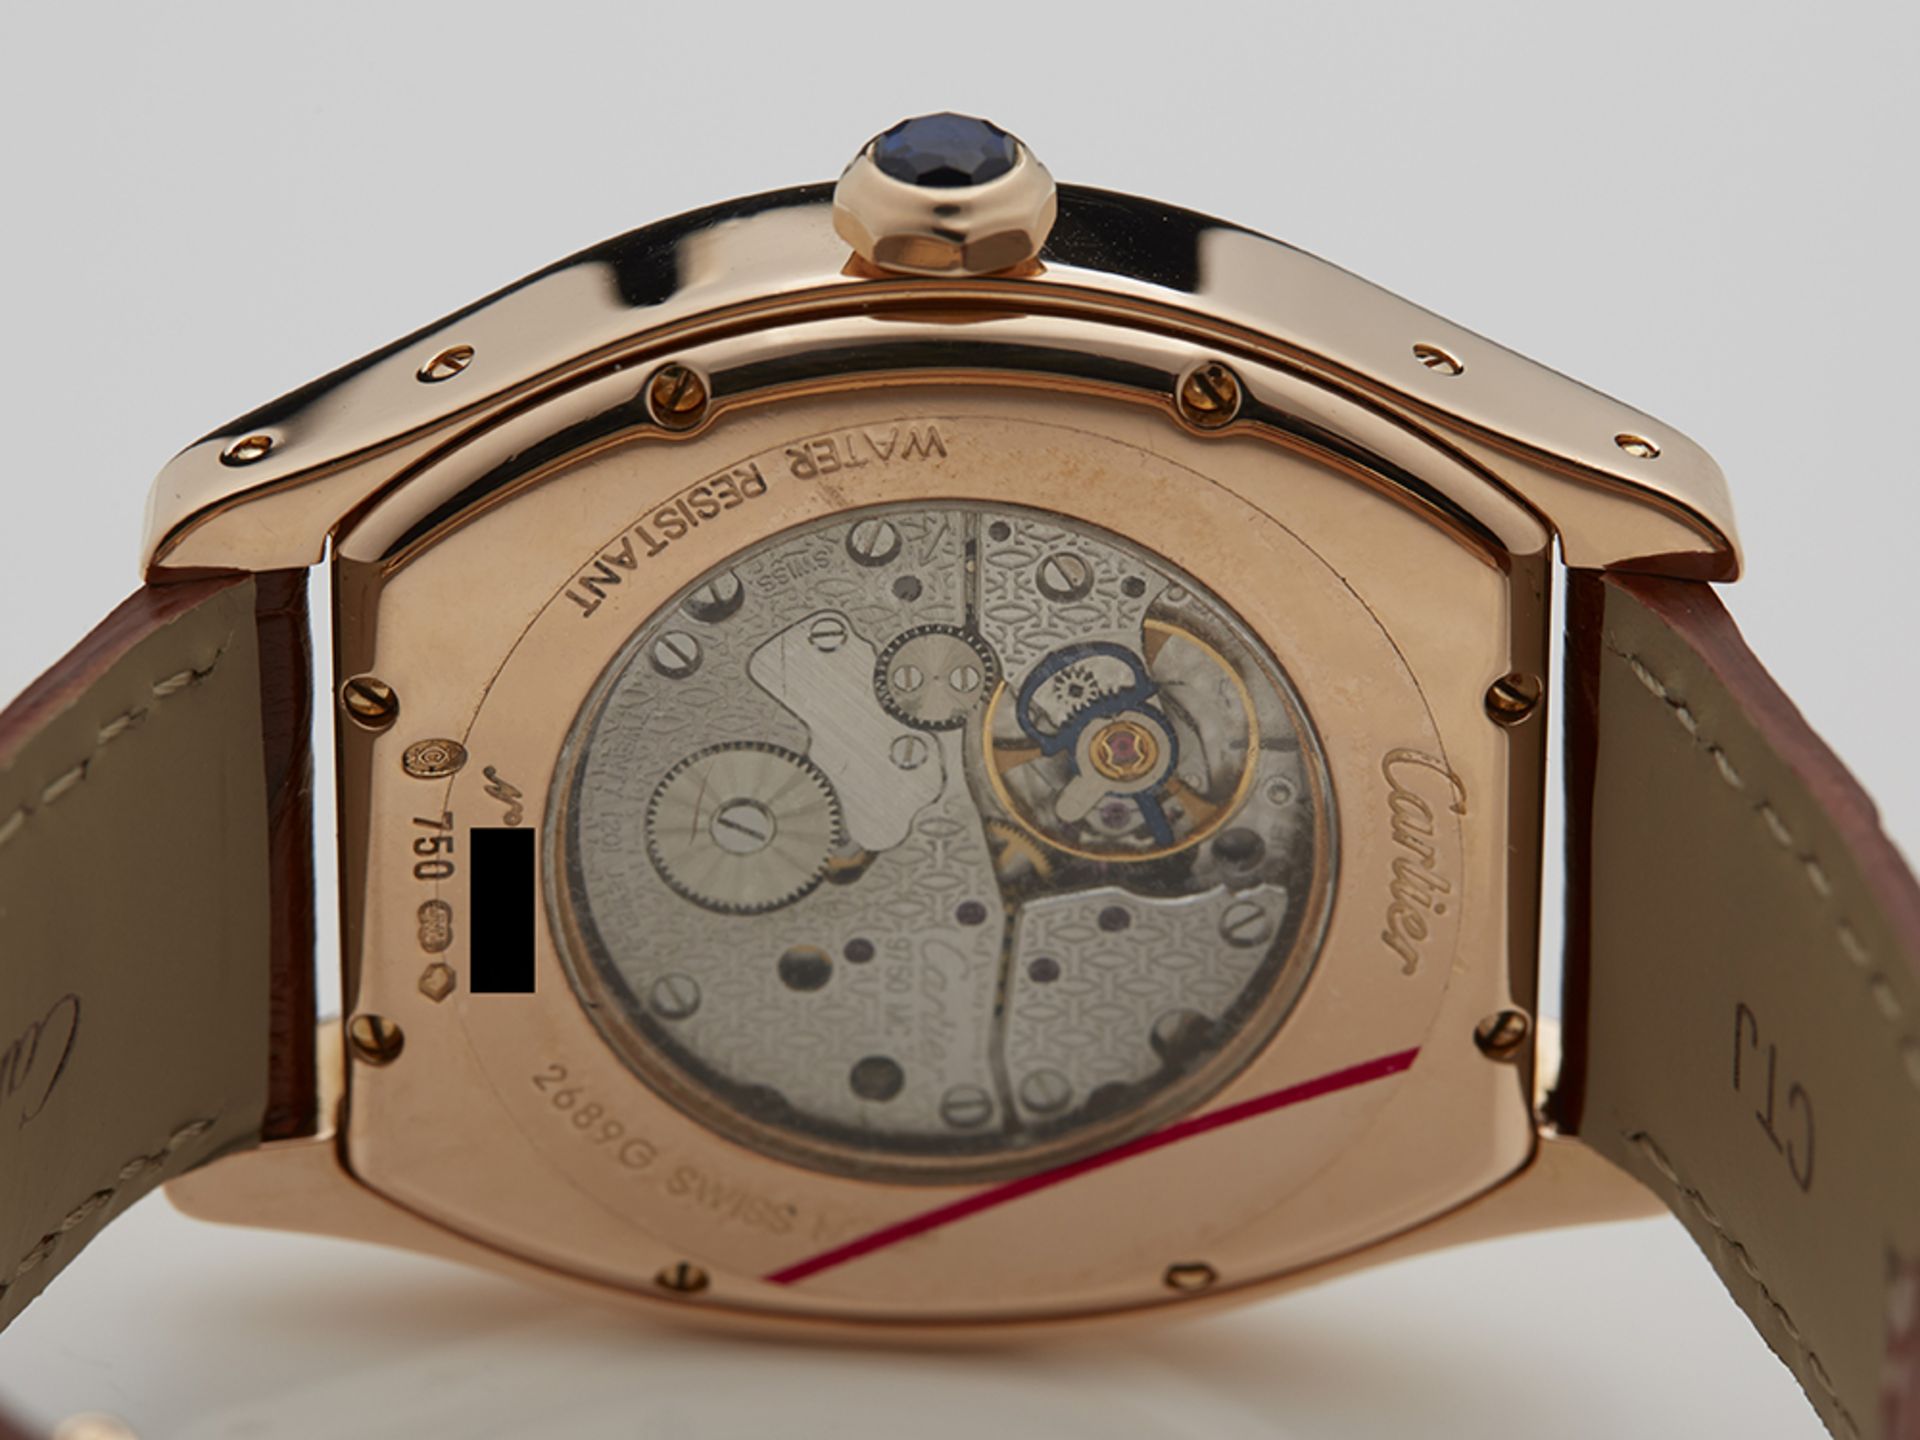 Cartier, Tortue Privee Power Reserve 18k Rose Gold Limited Edition 2689G - Image 9 of 10